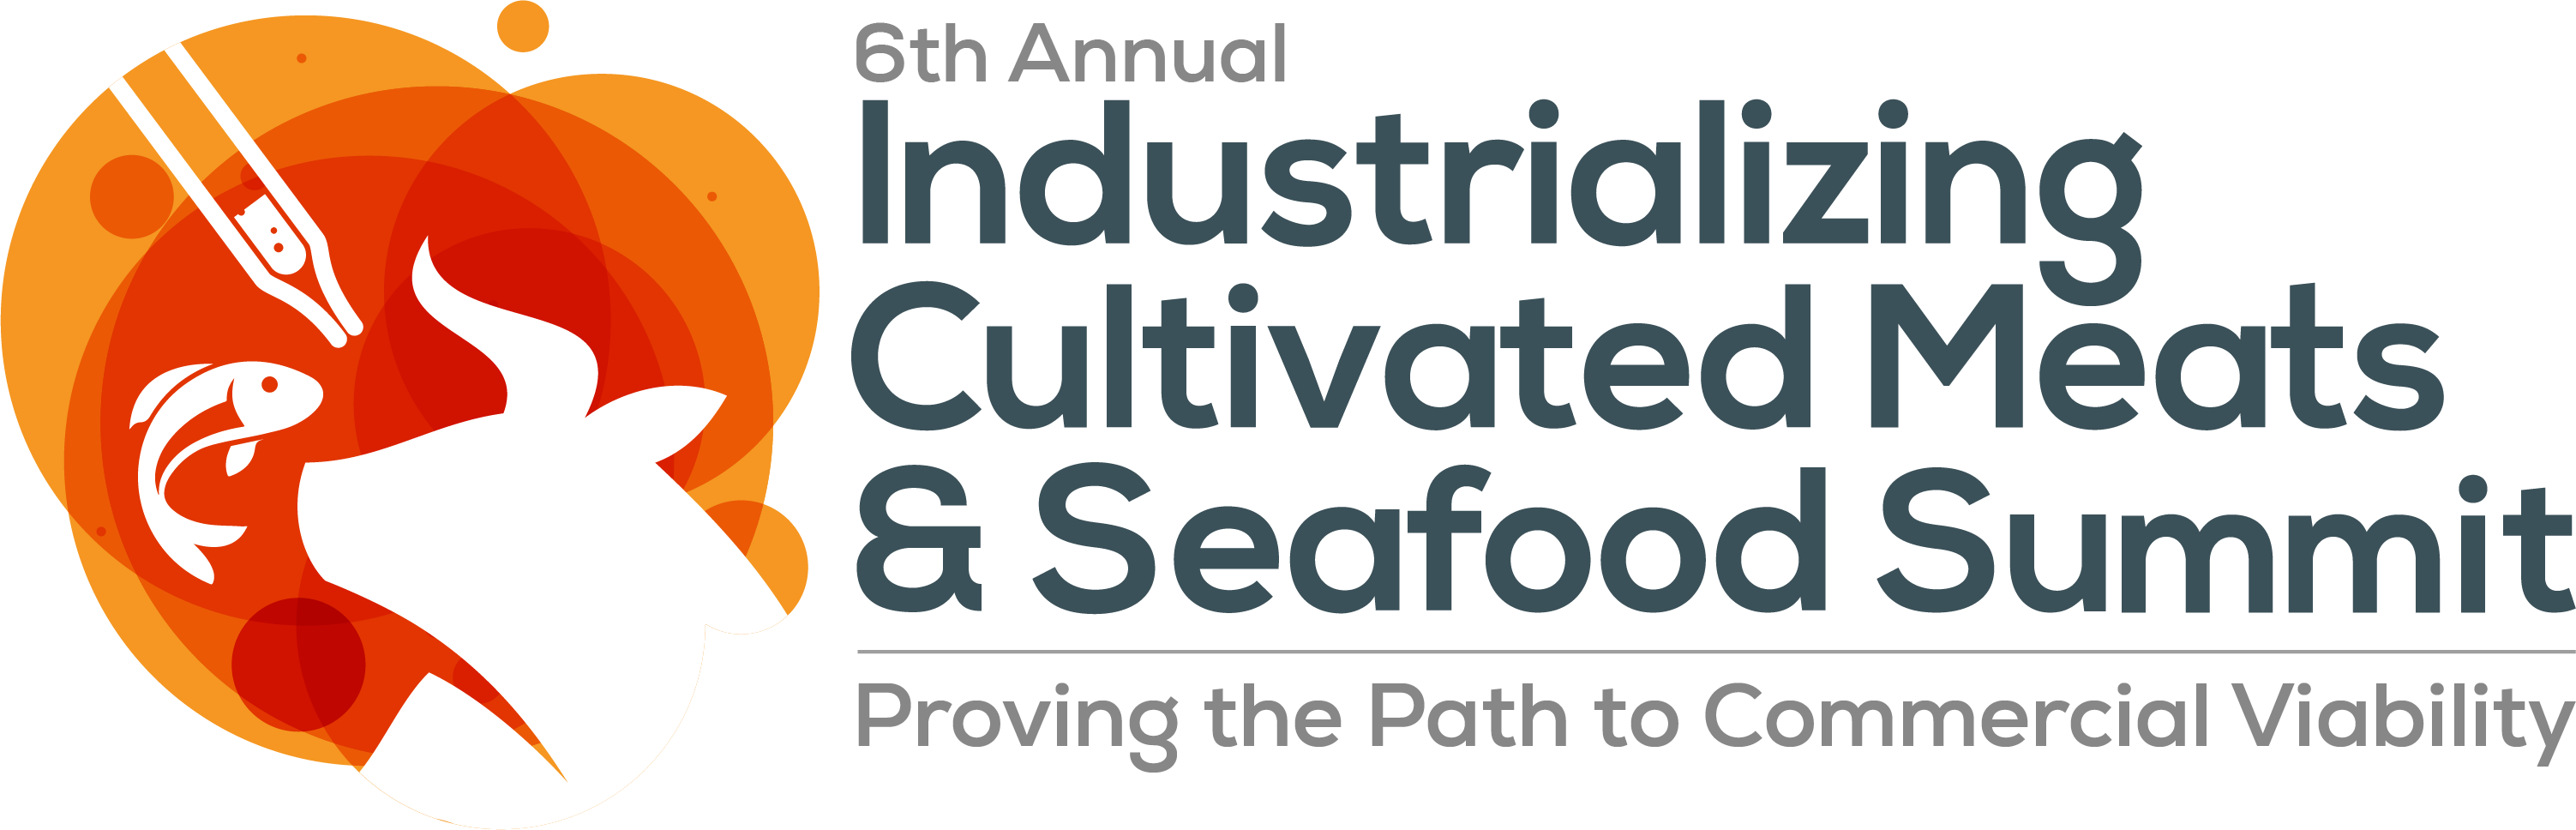 Cultivated Meats & Seafood Summit